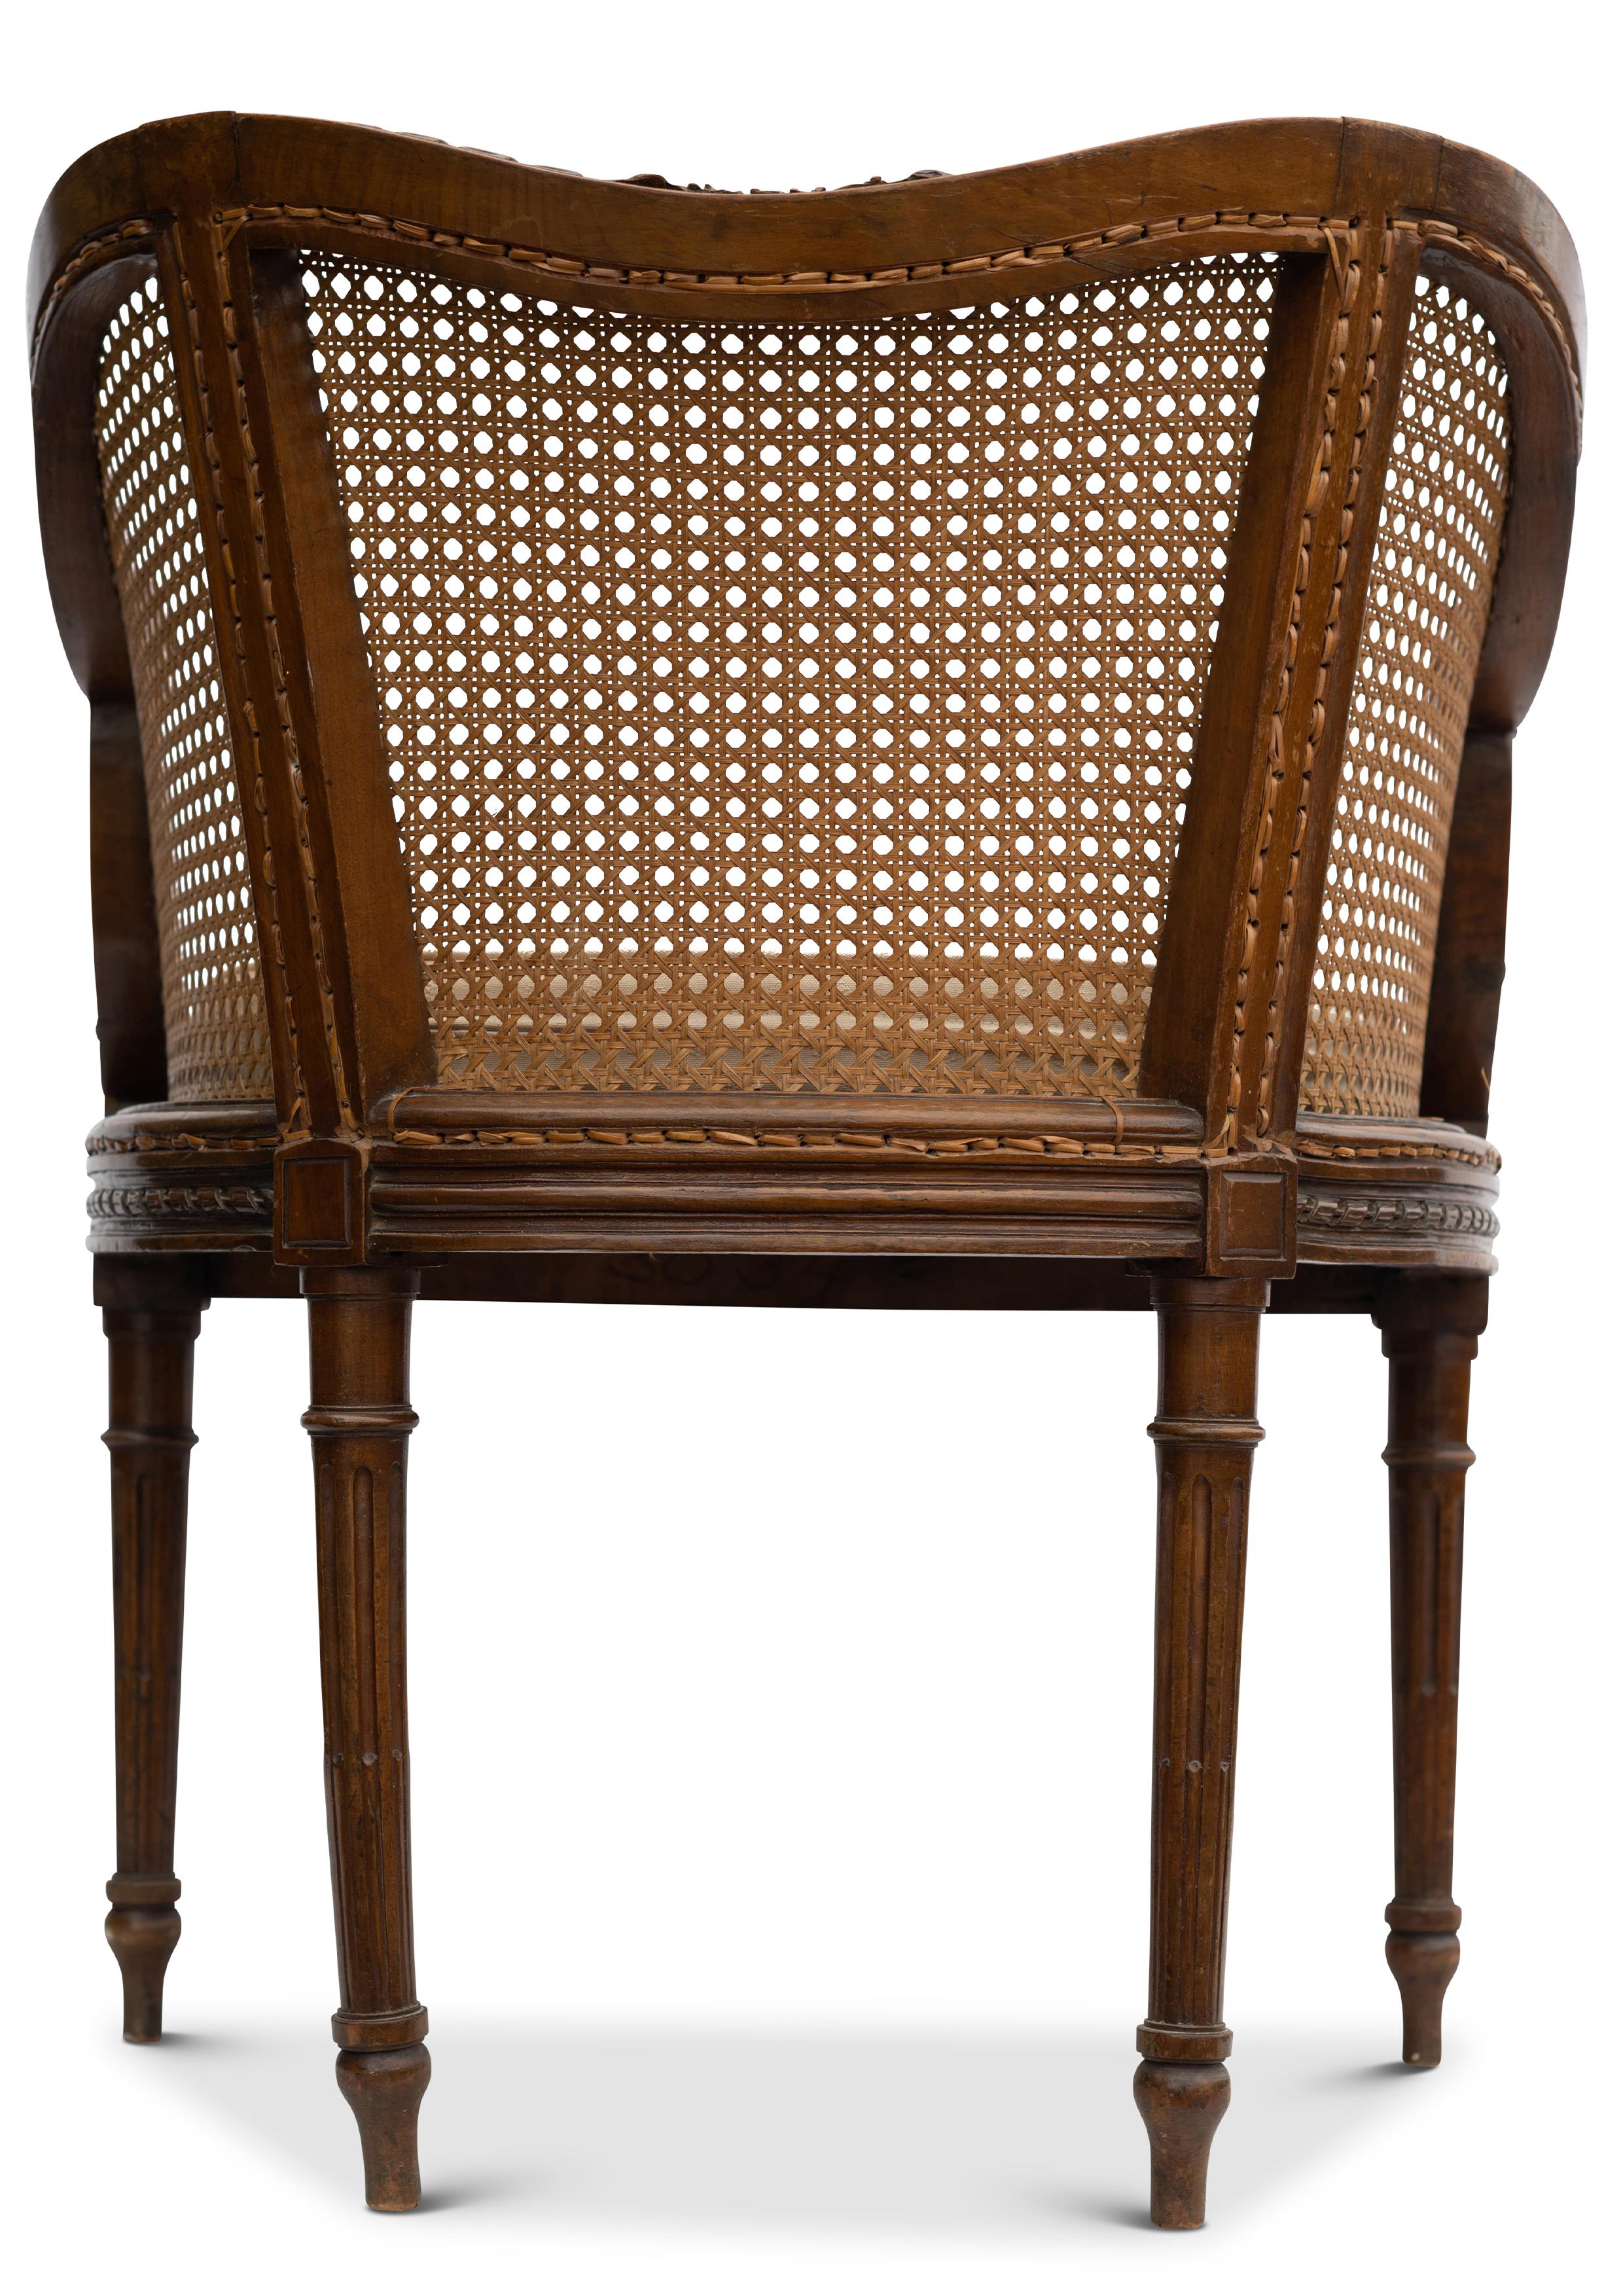 British Antique Bergère Beech & Cane Carved Armchair With Cushion & Reeded Legs For Sale